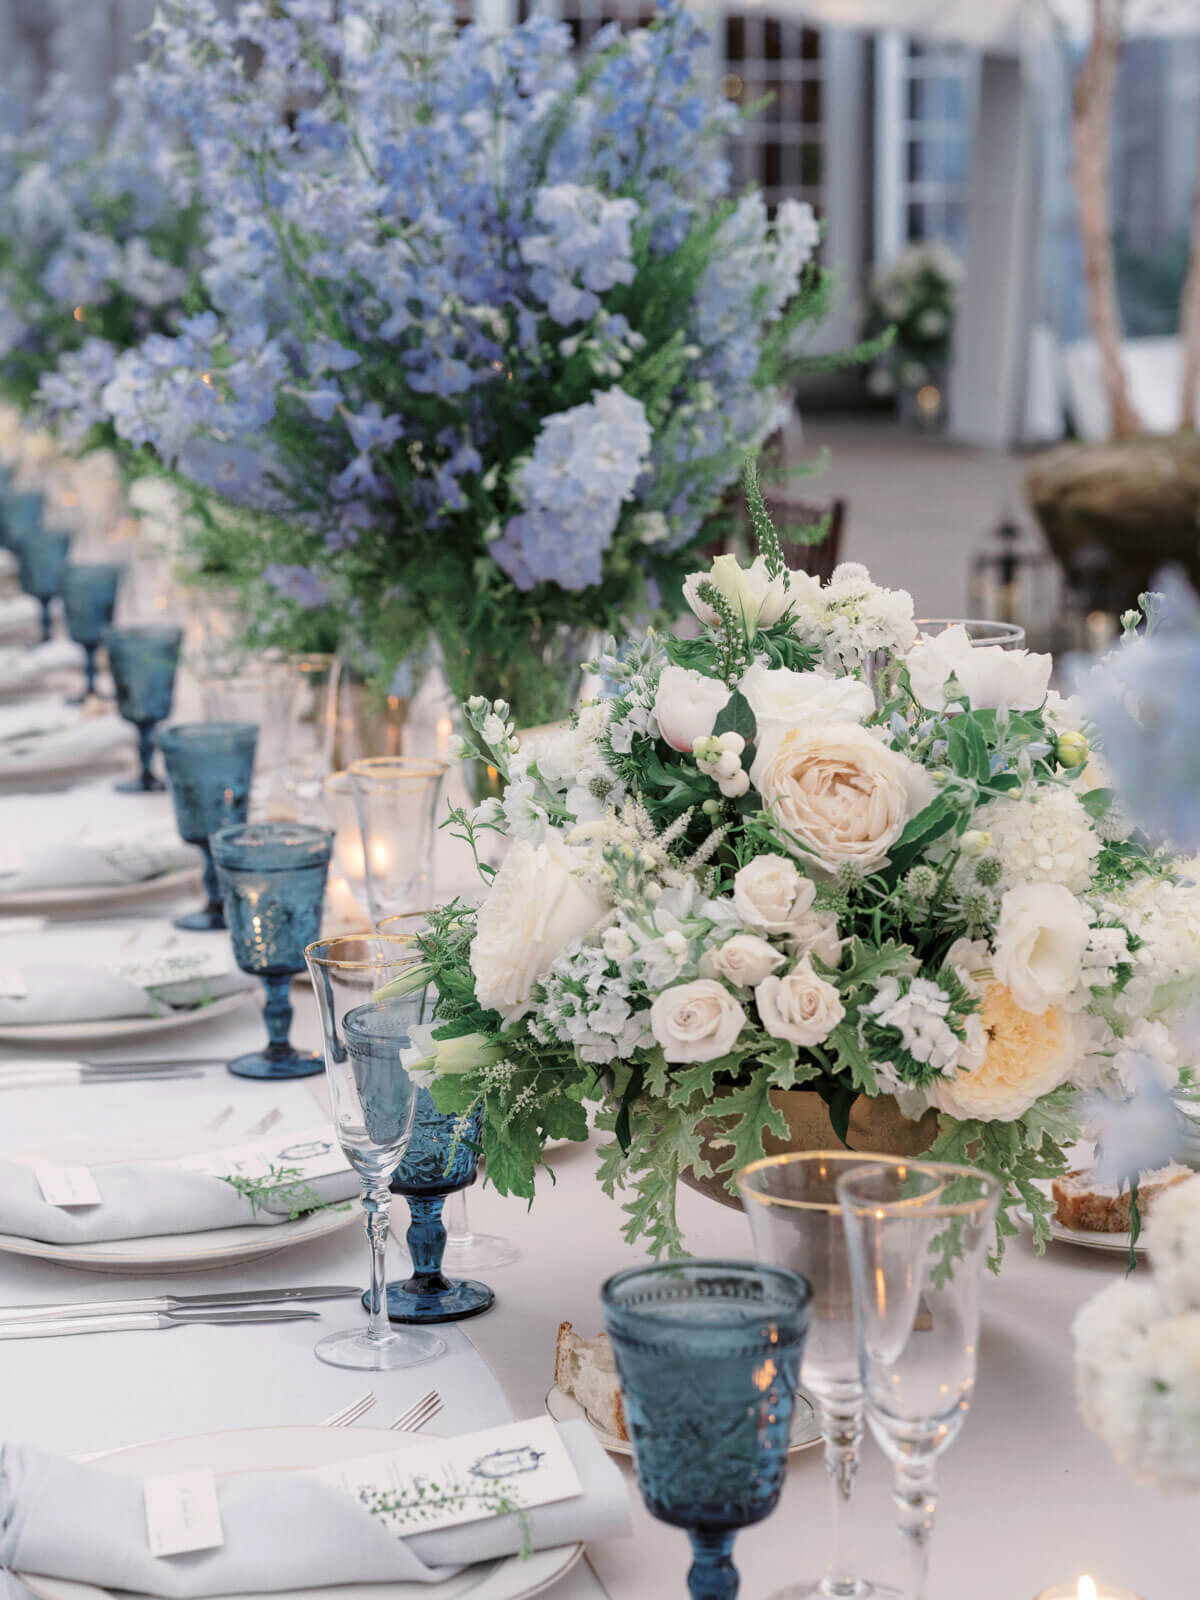 An elegant wedding dining table with white and blue flower centerpieces, cutleries, and blue wine glasses. Image by Jenny Fu Studio